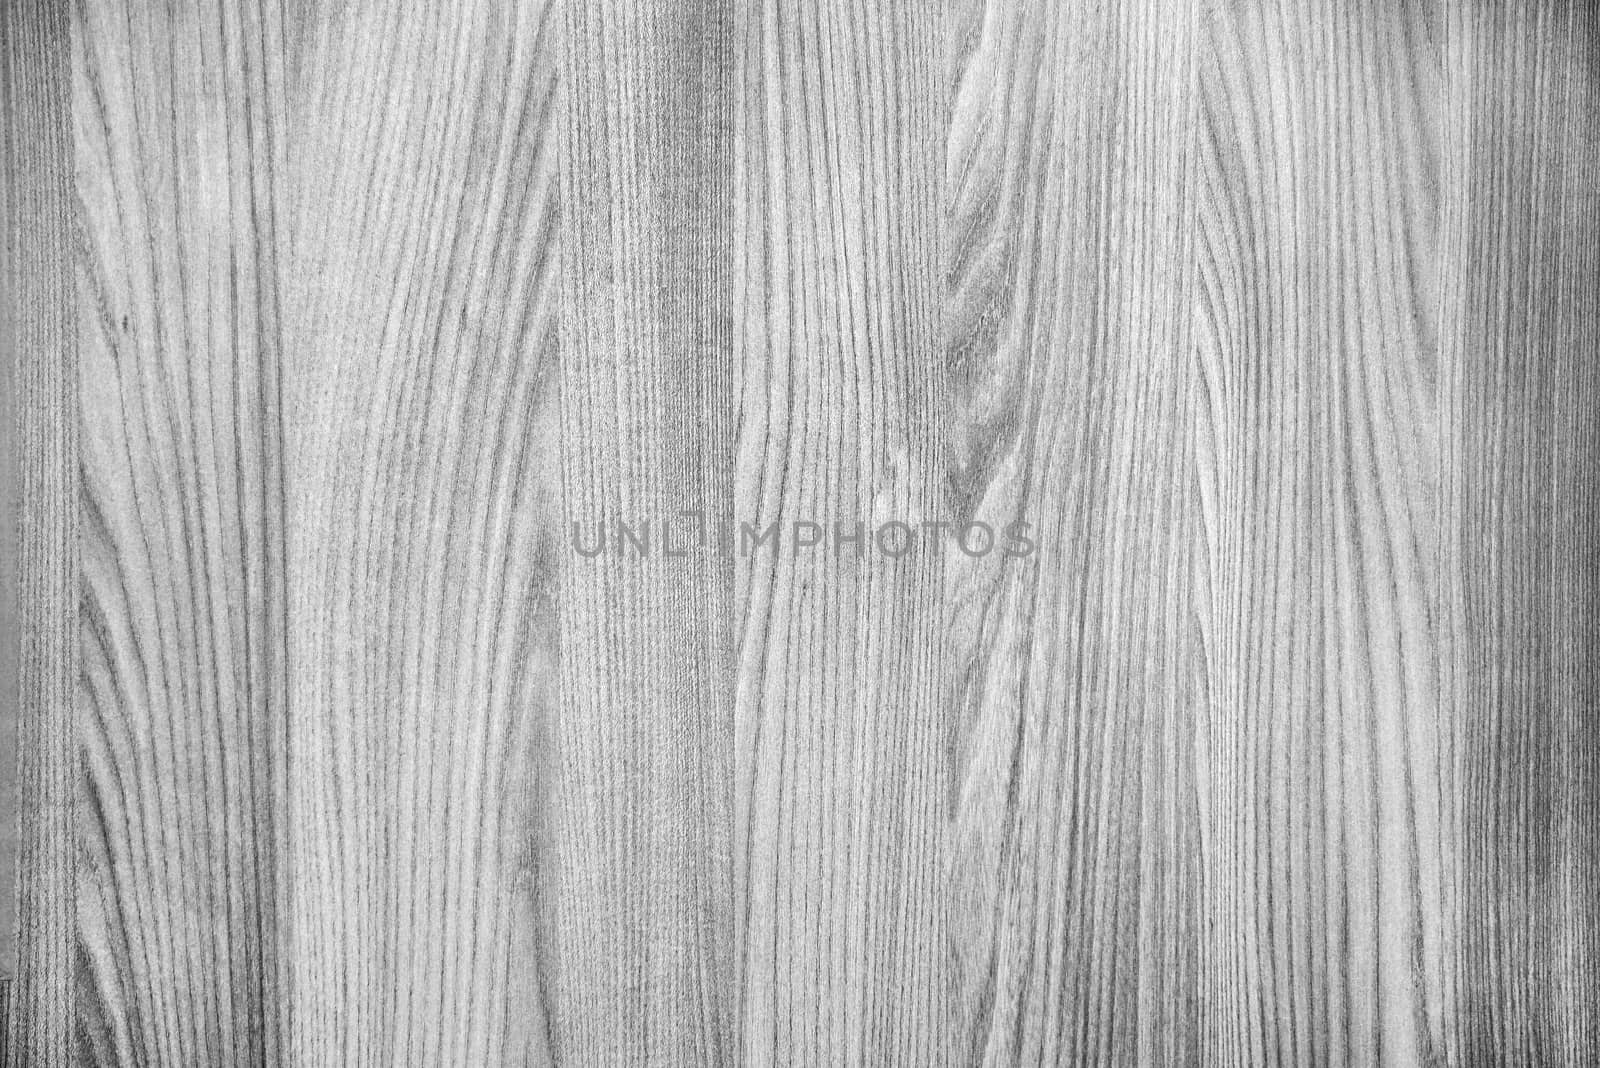 White wood texture background by phochi